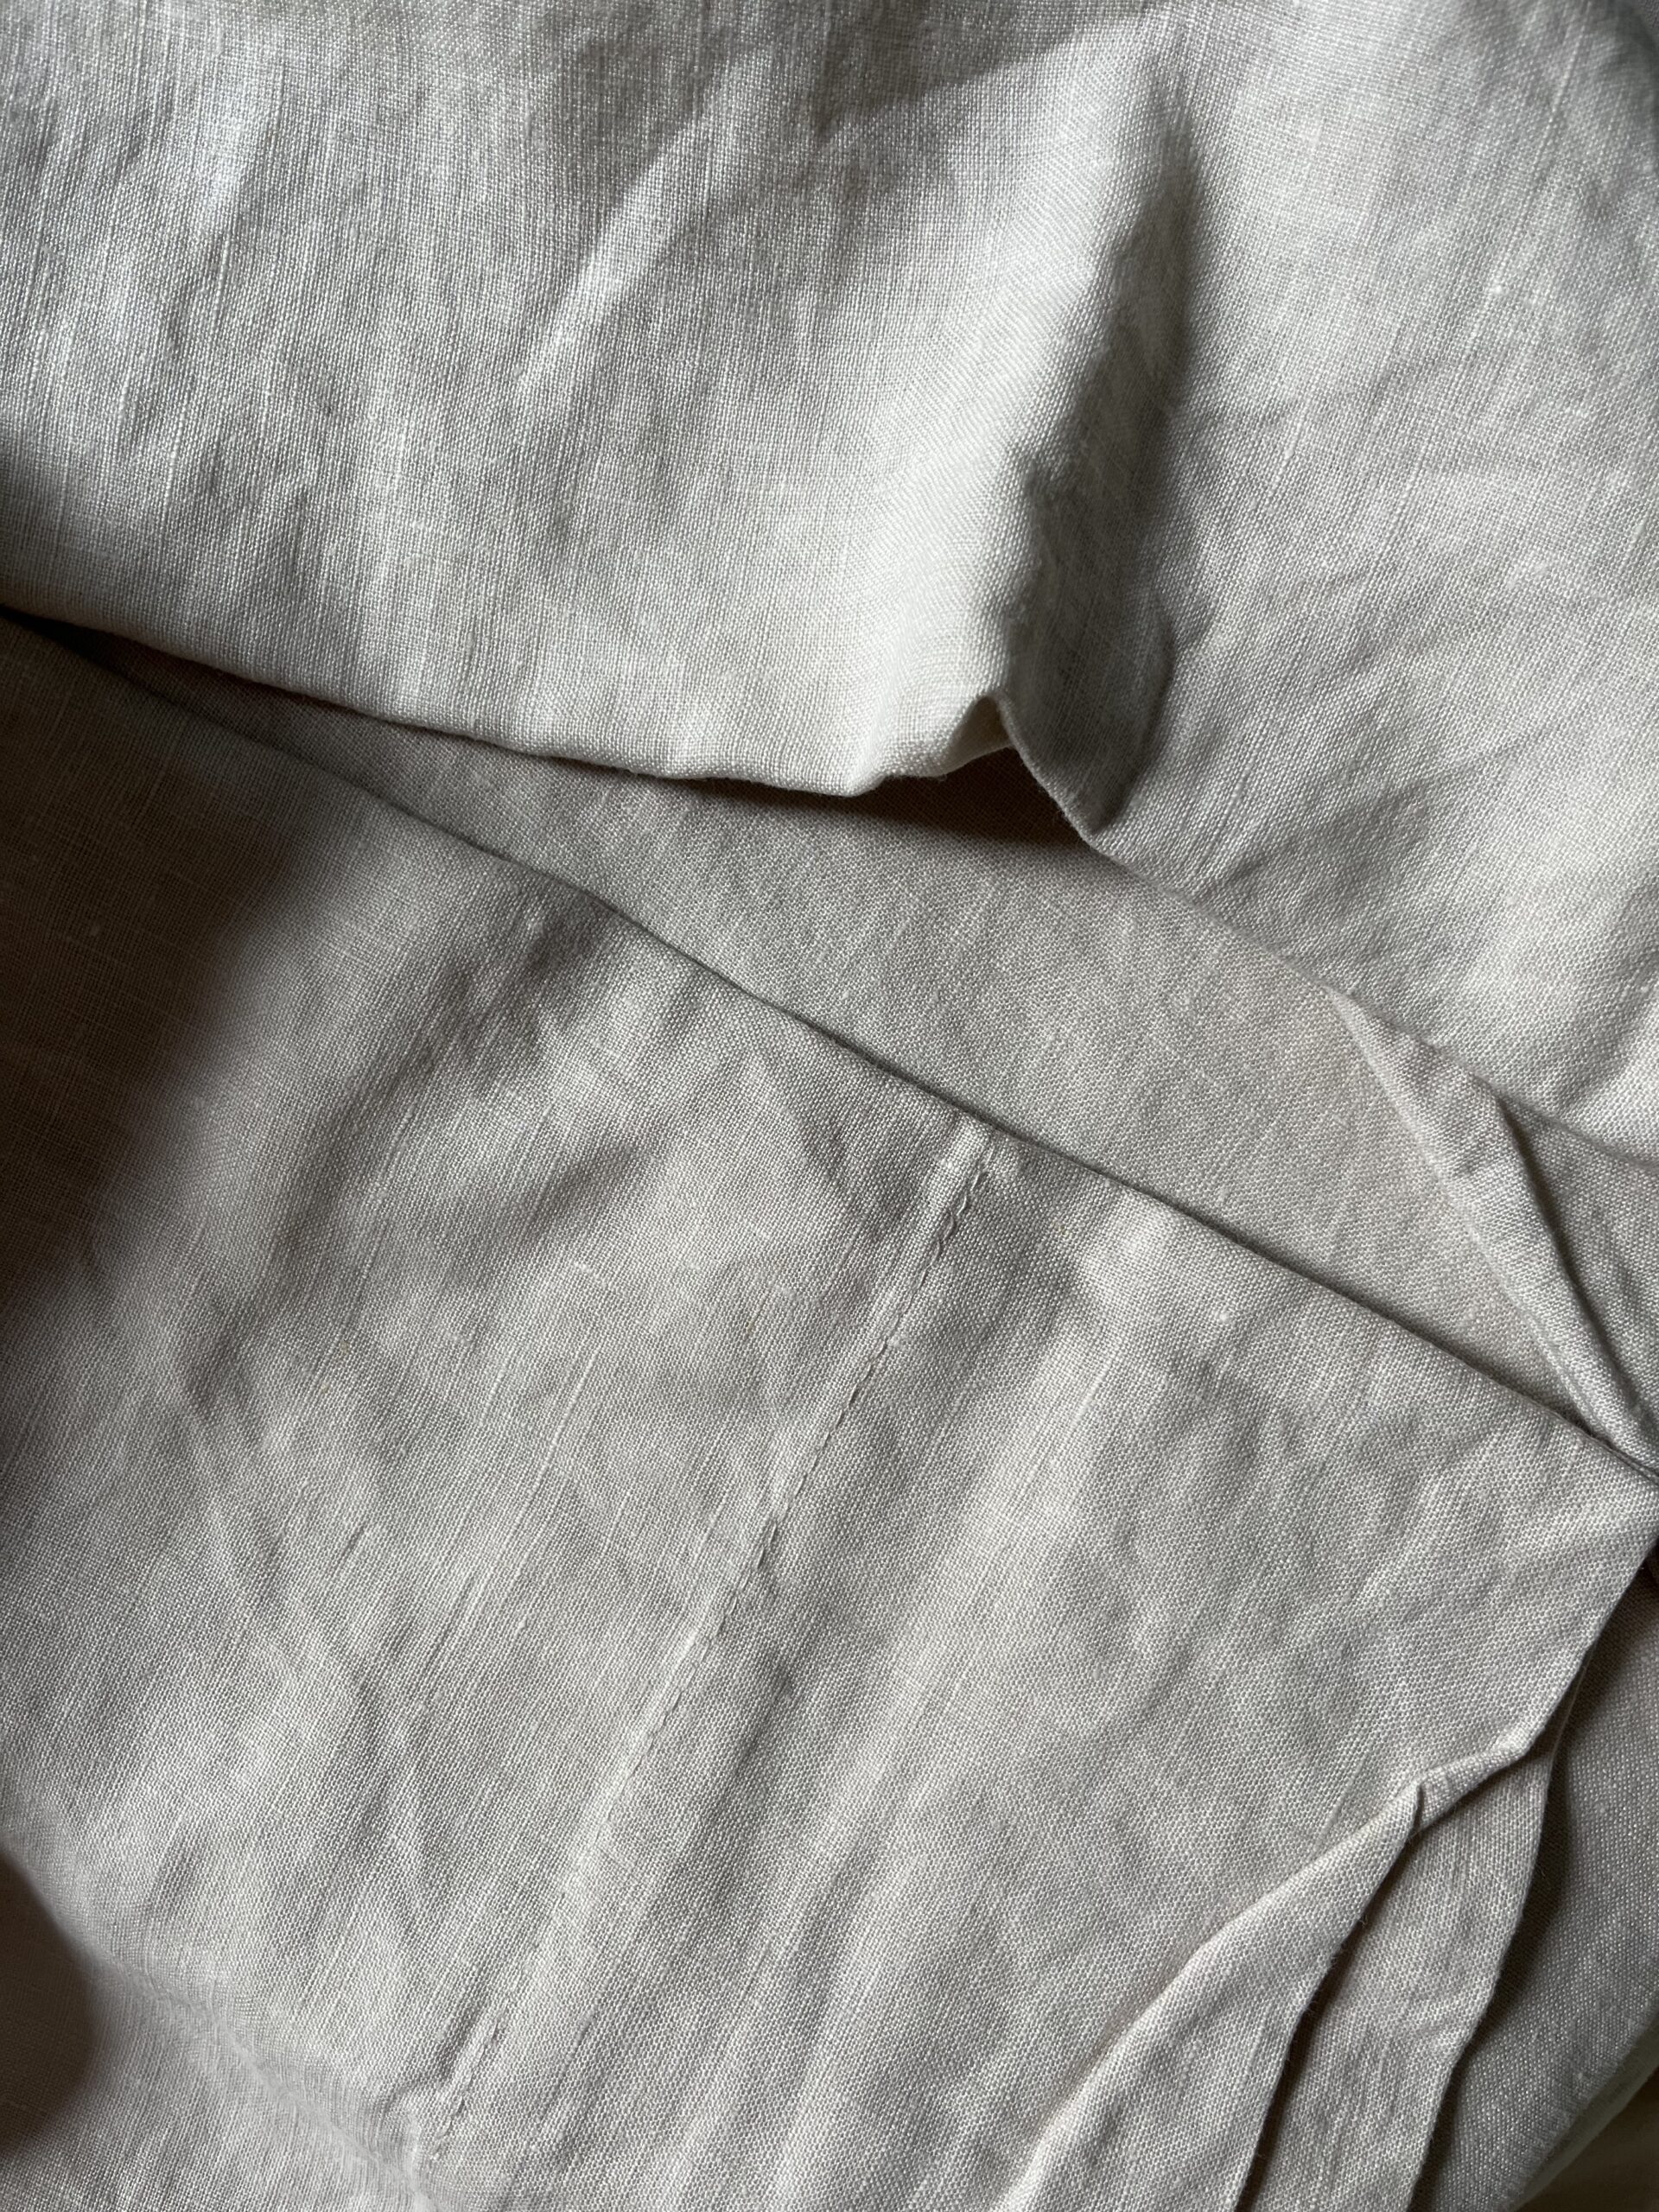 Close-up image of rumpled, light-colored fabric with visible stitching and texture.